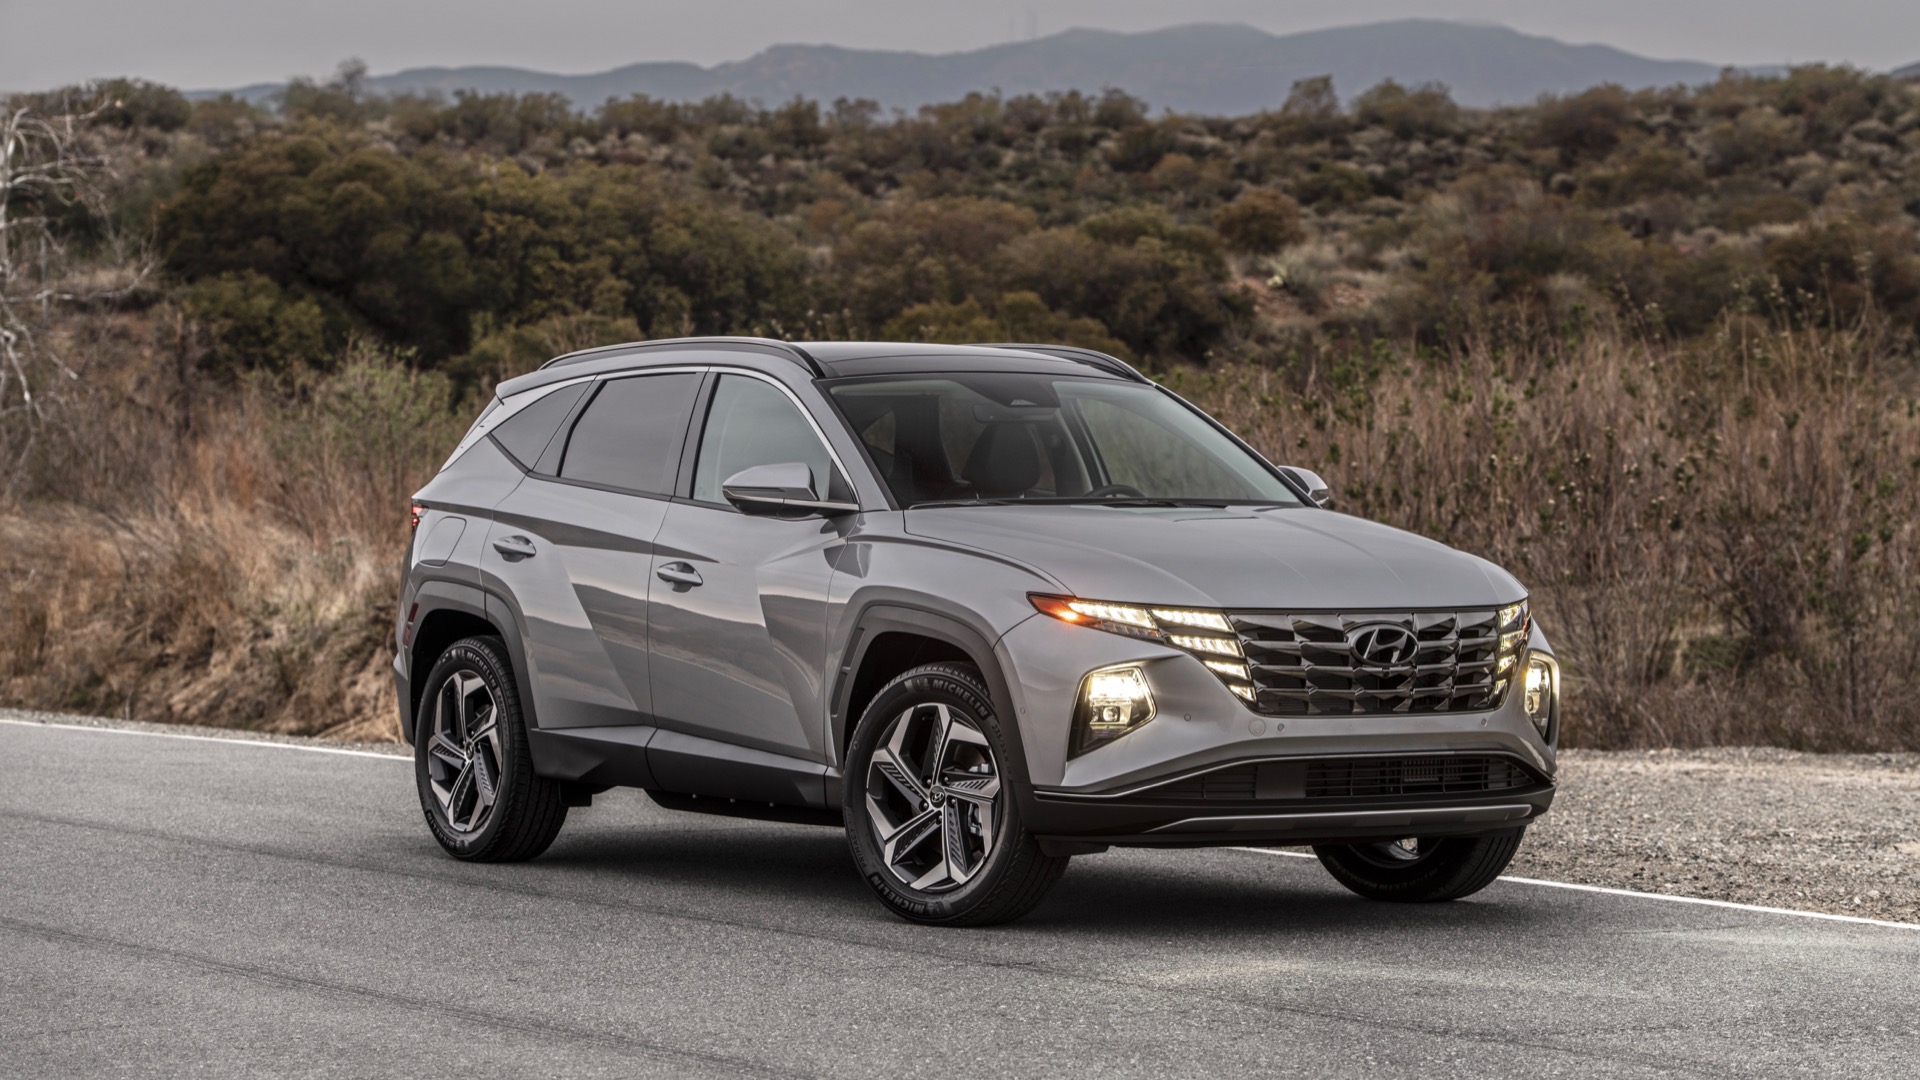 2022 Hyundai Tucson Review, Ratings, Specs, Prices, and Photos Bharat